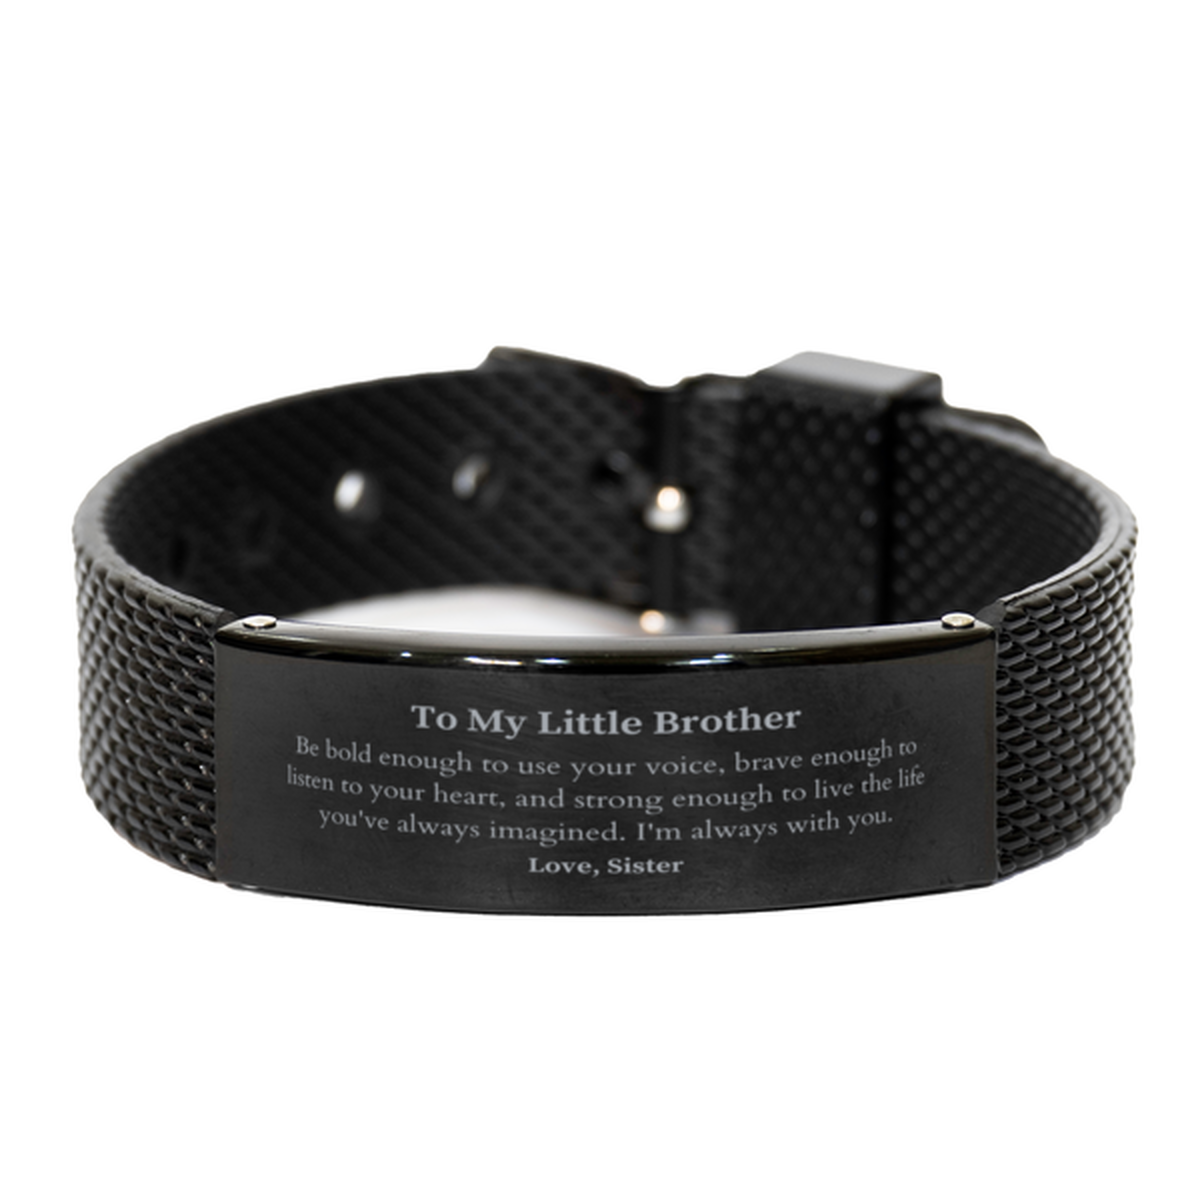 Keepsake Little Brother Black Shark Mesh Bracelet Gift Idea Graduation Christmas Birthday Little Brother from Sister, Little Brother Be bold enough to use your voice, brave enough to listen to your heart. Love, Sister